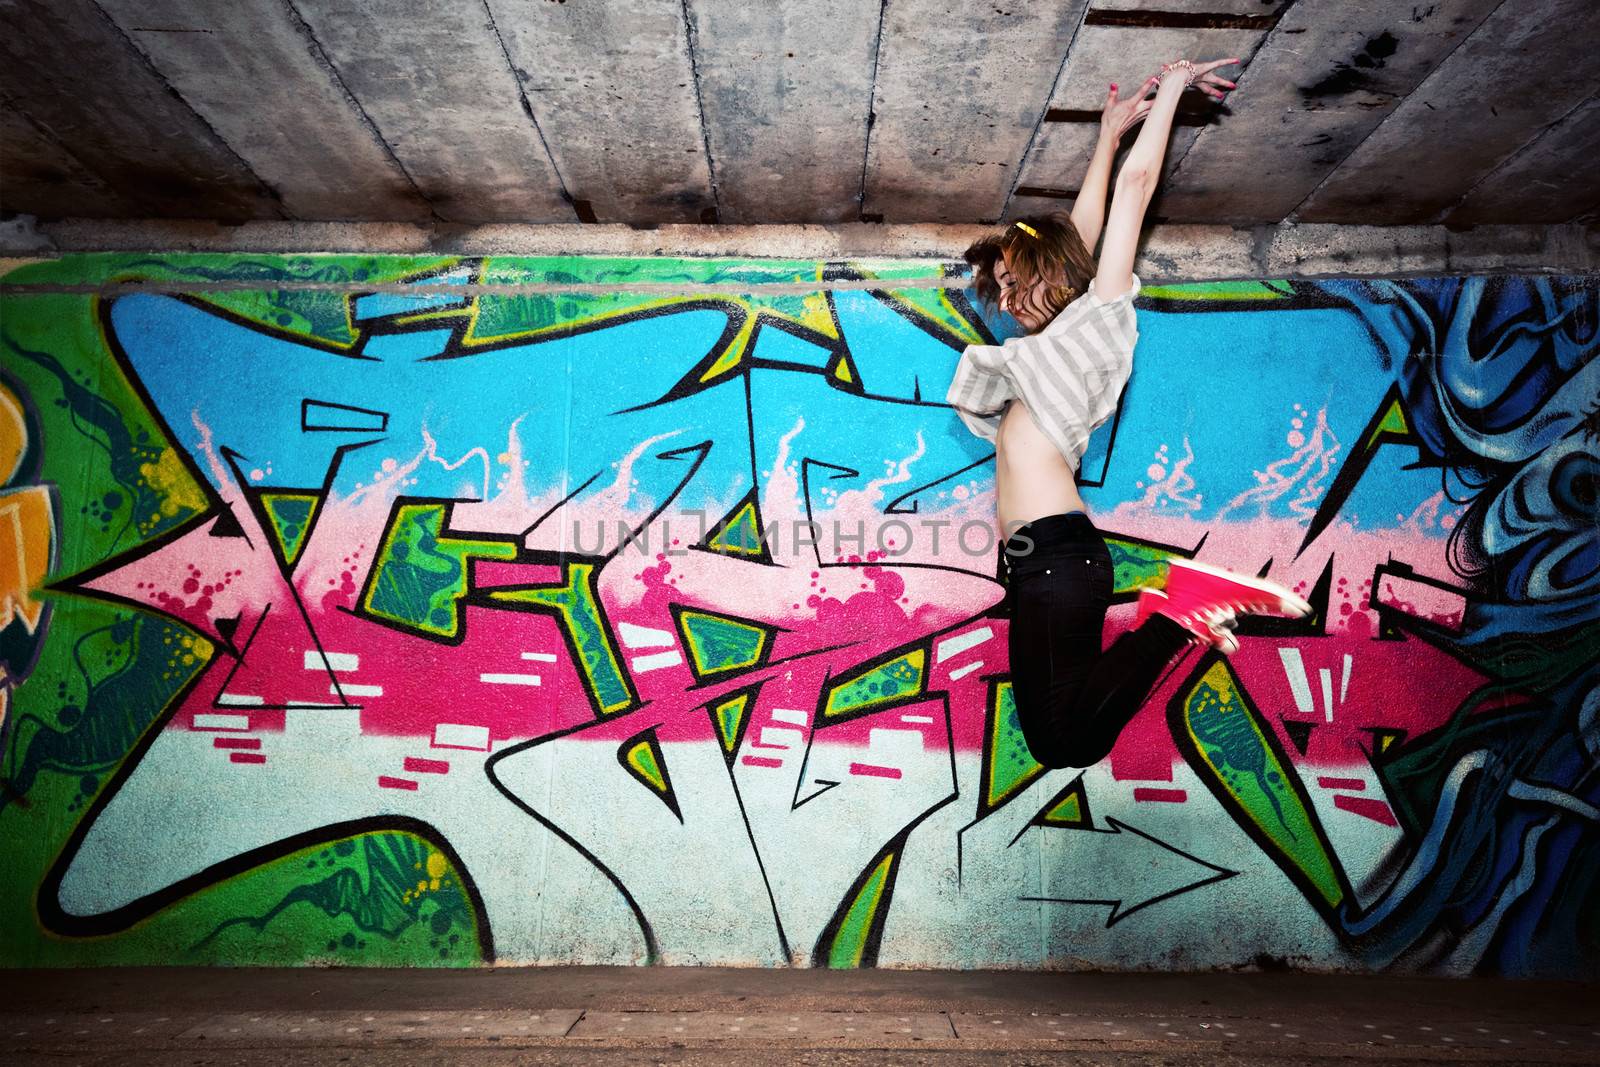 Stylish fashionable girl in a dance pose, jumping against colorful graffiti wall. Fashion, trends, subculture. Full body shot